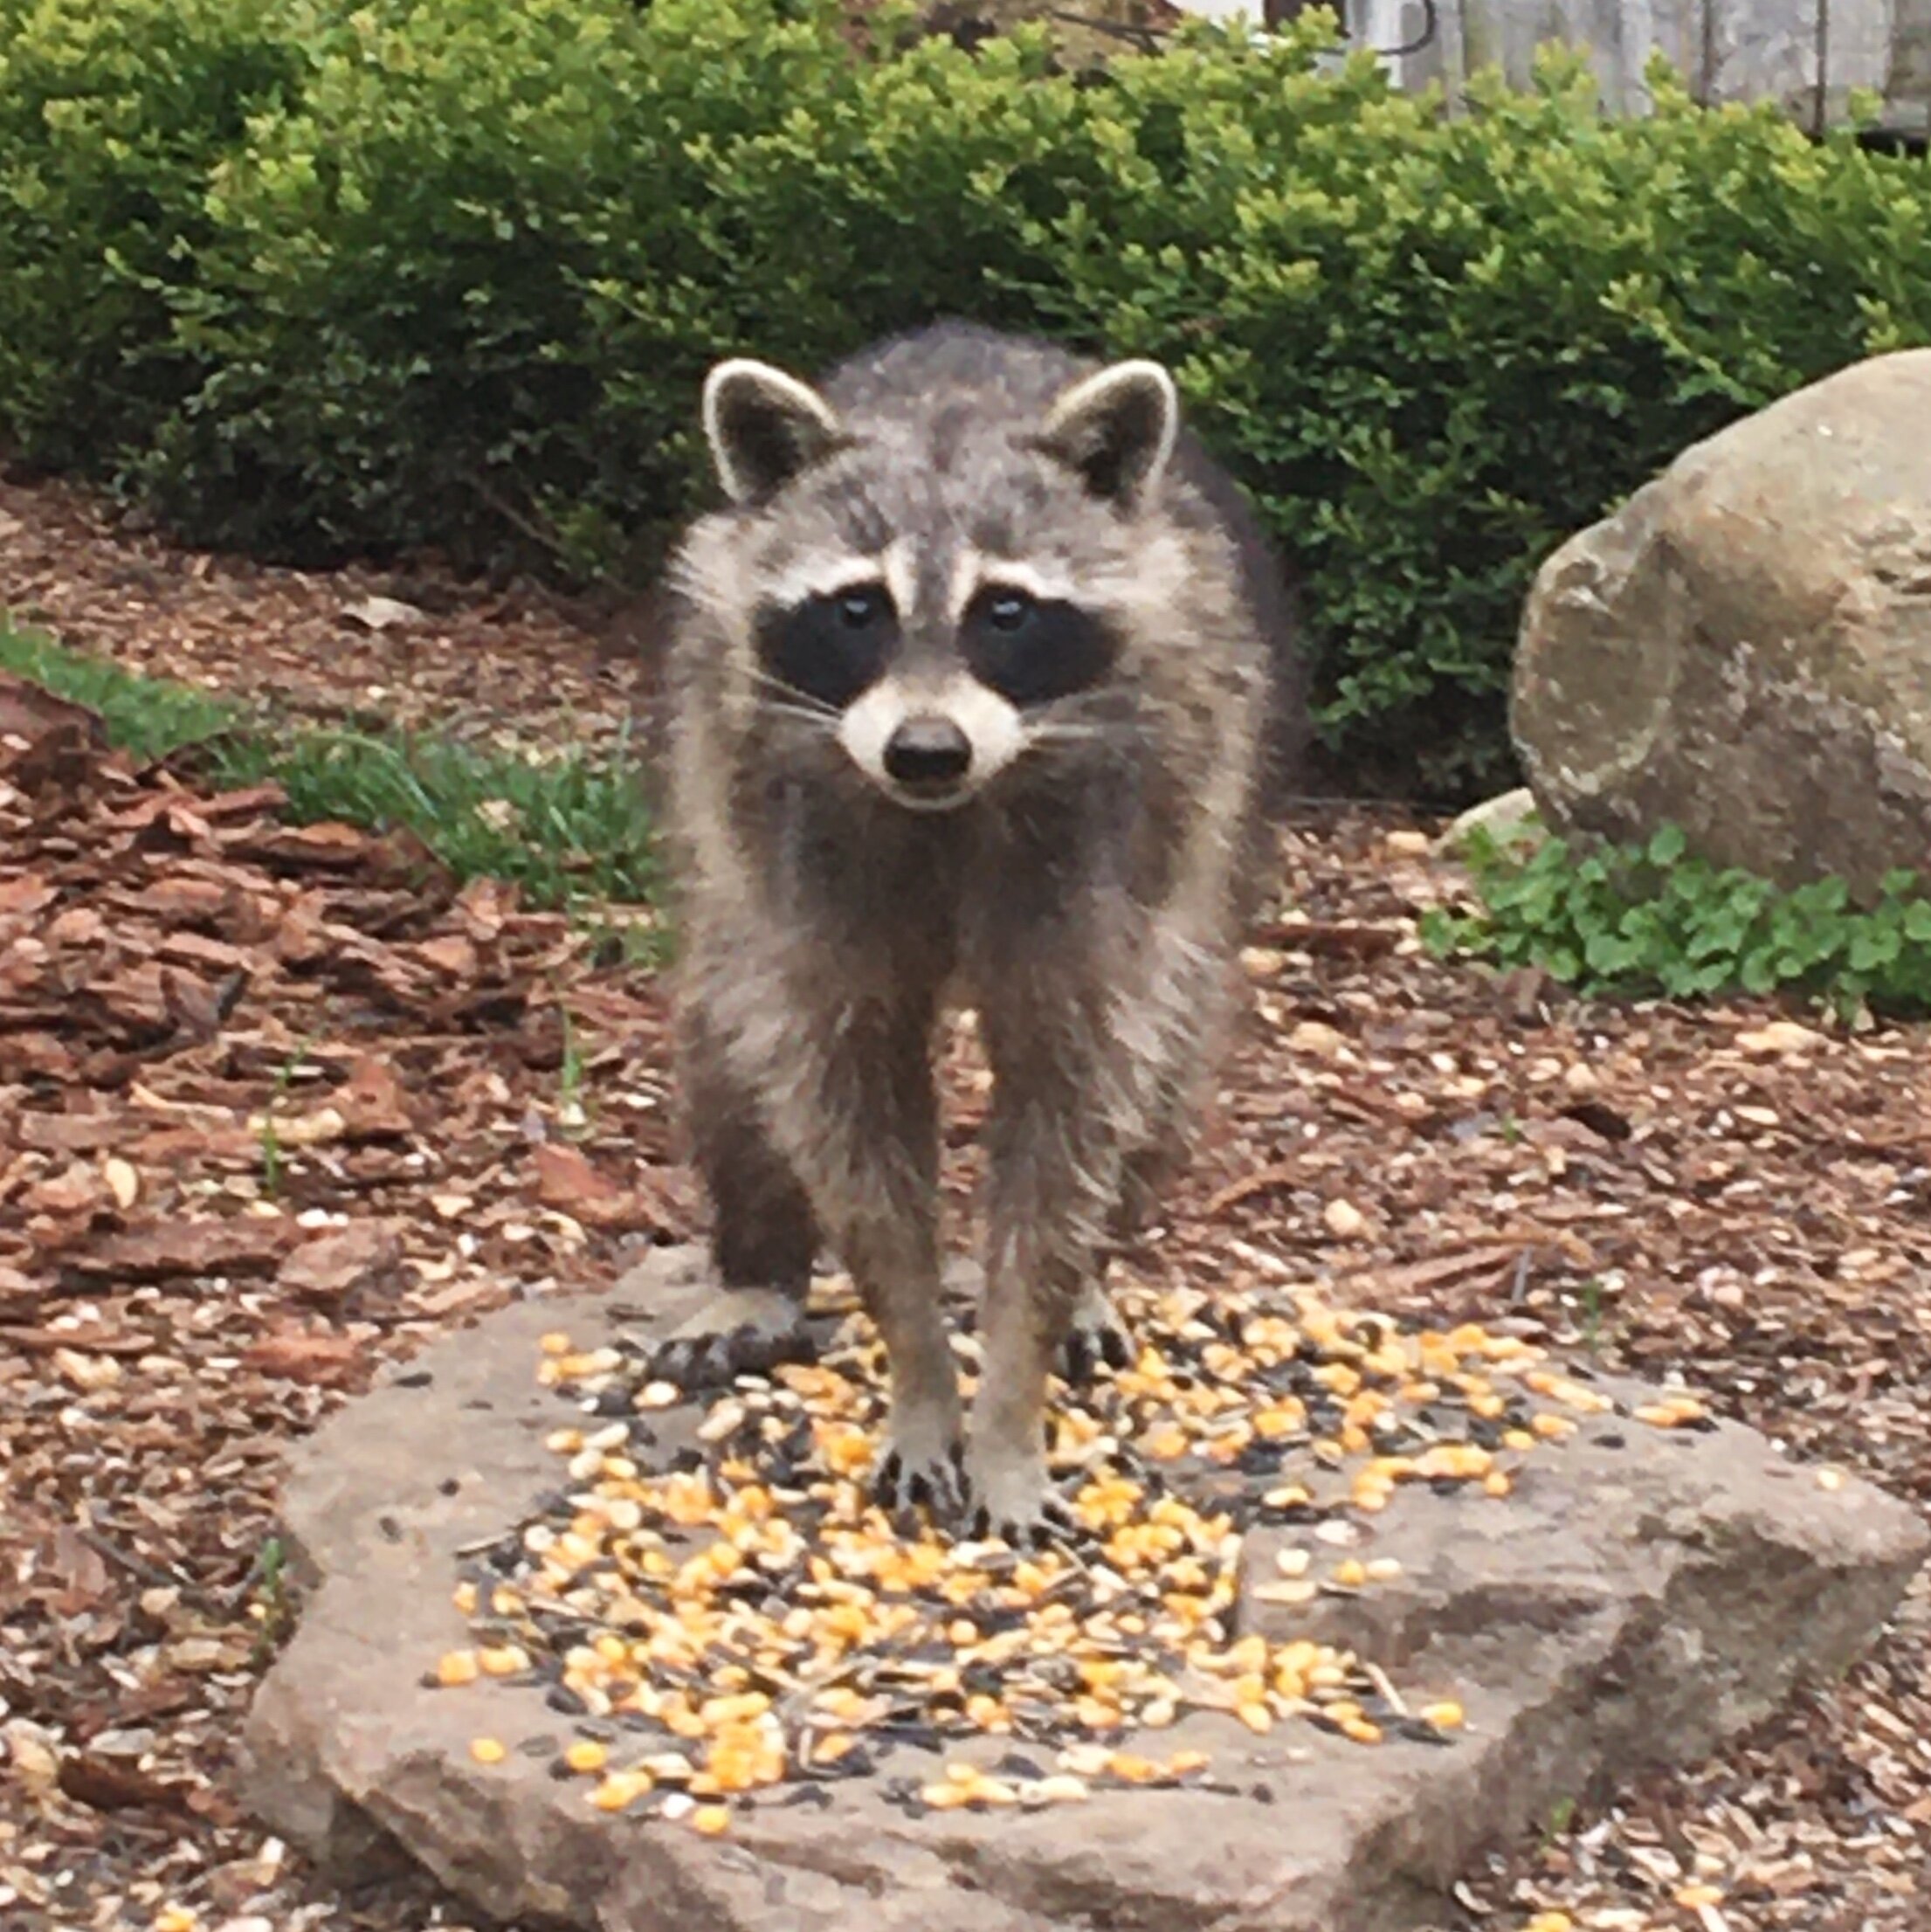 Barney the raccoon. We fear he might eat all of our produce plants, once they're moved outside.